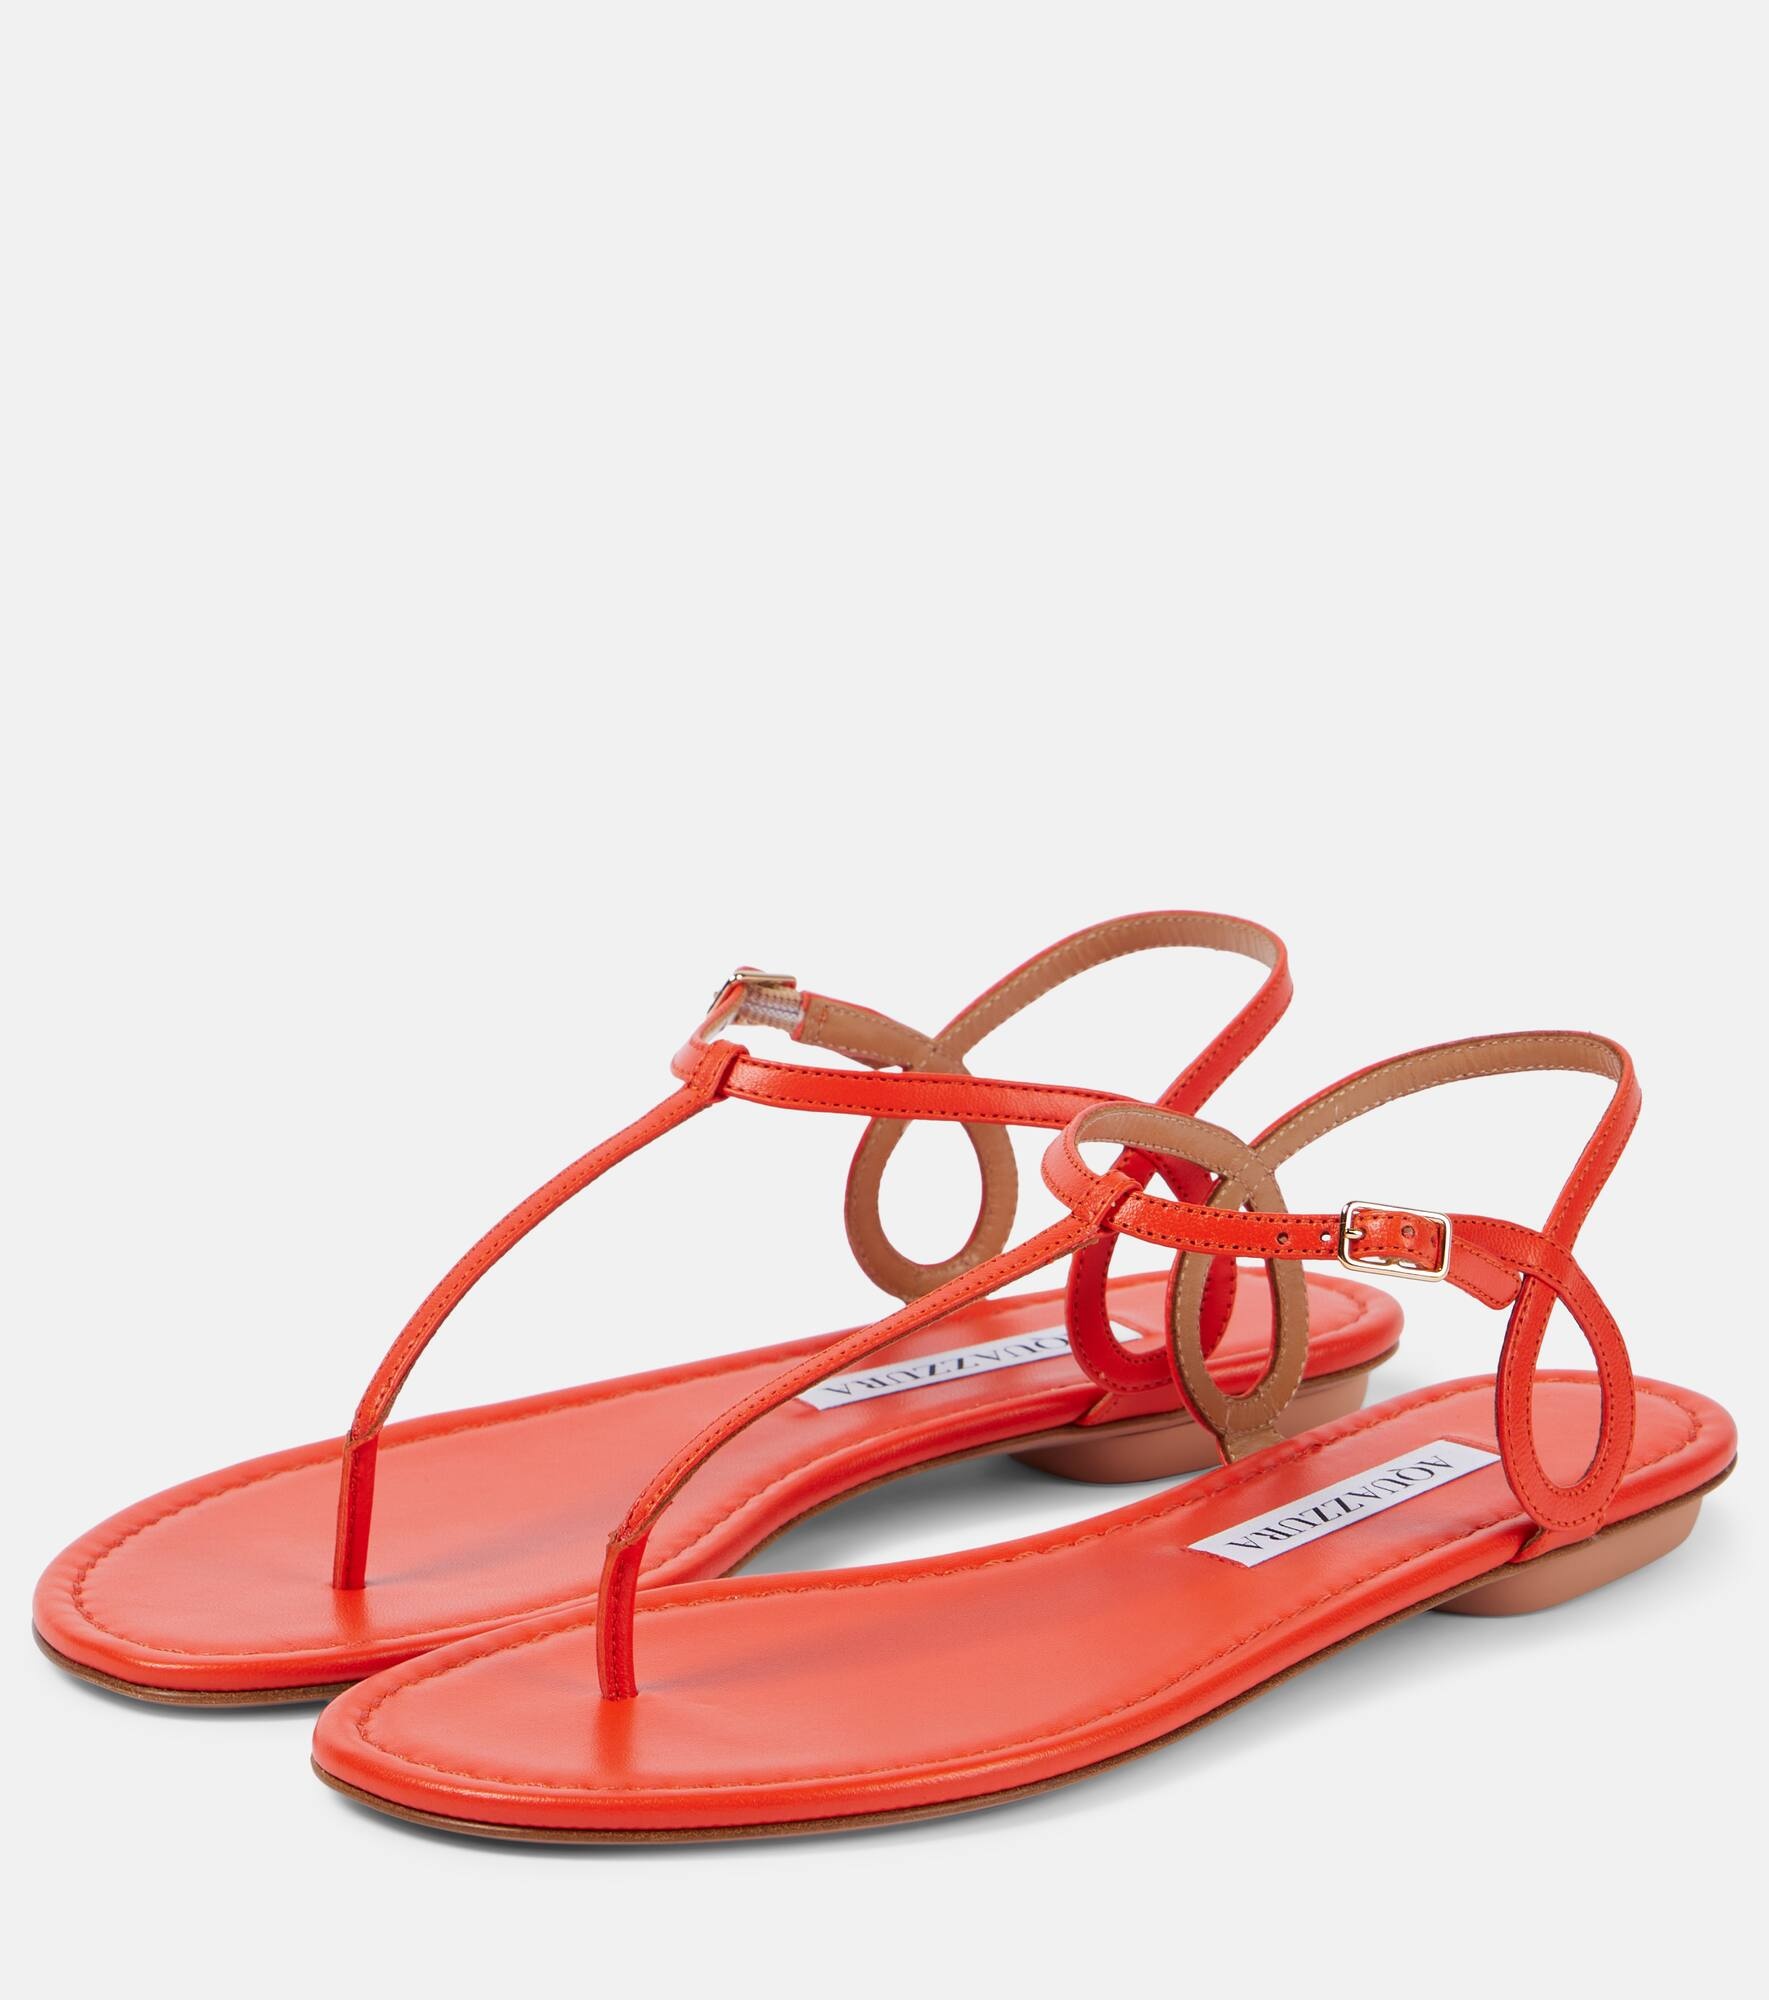 Almost Bare leather thong sandals - 5